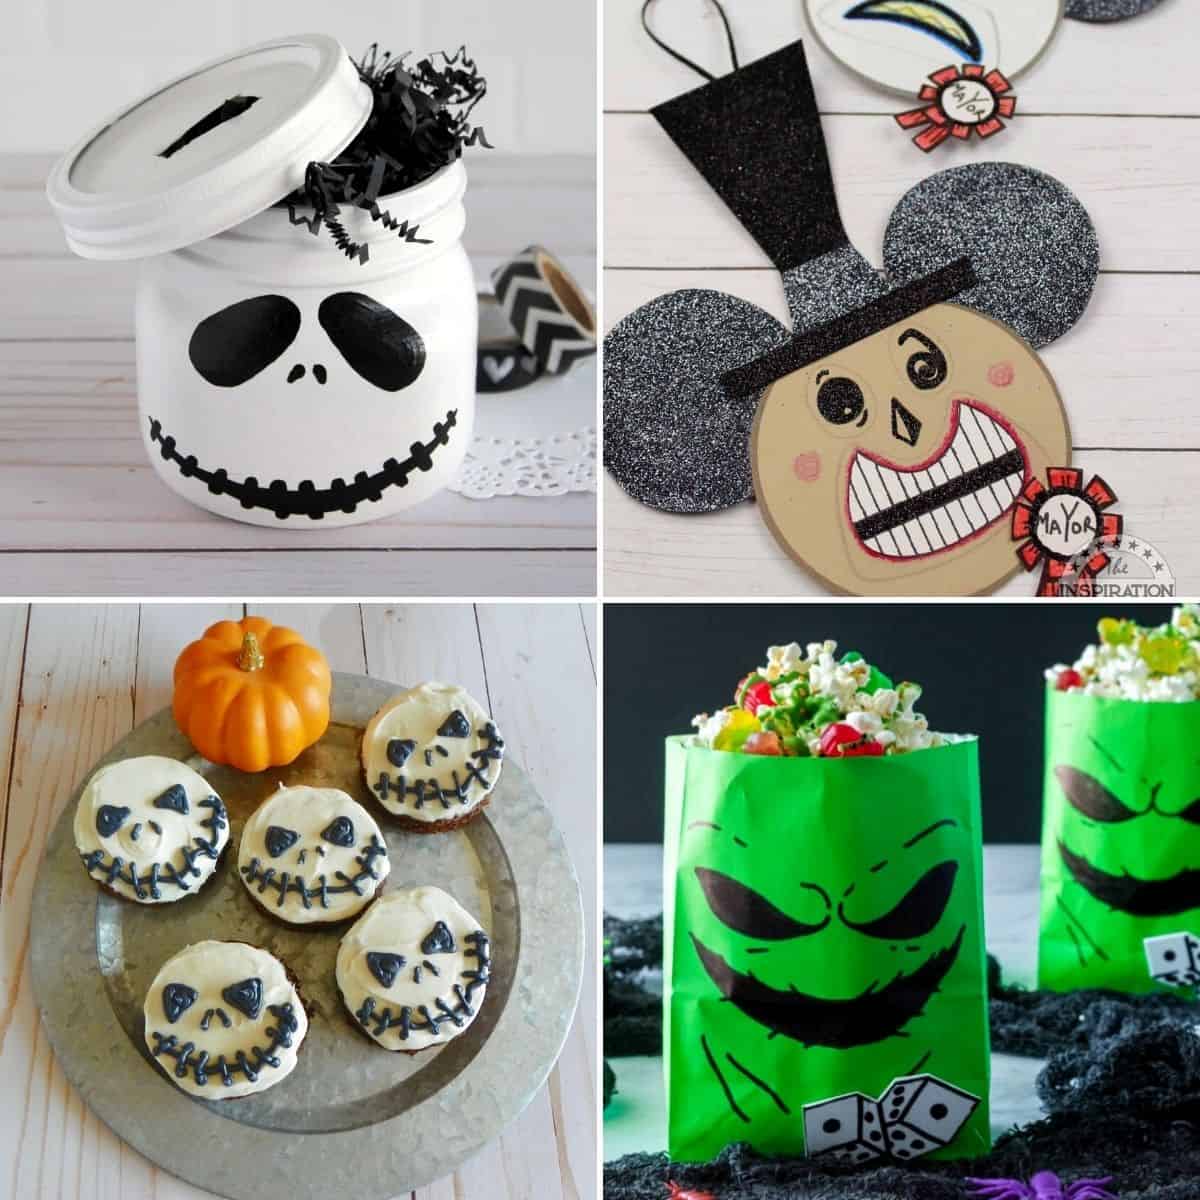 nightmare before Christmas decor and crafts